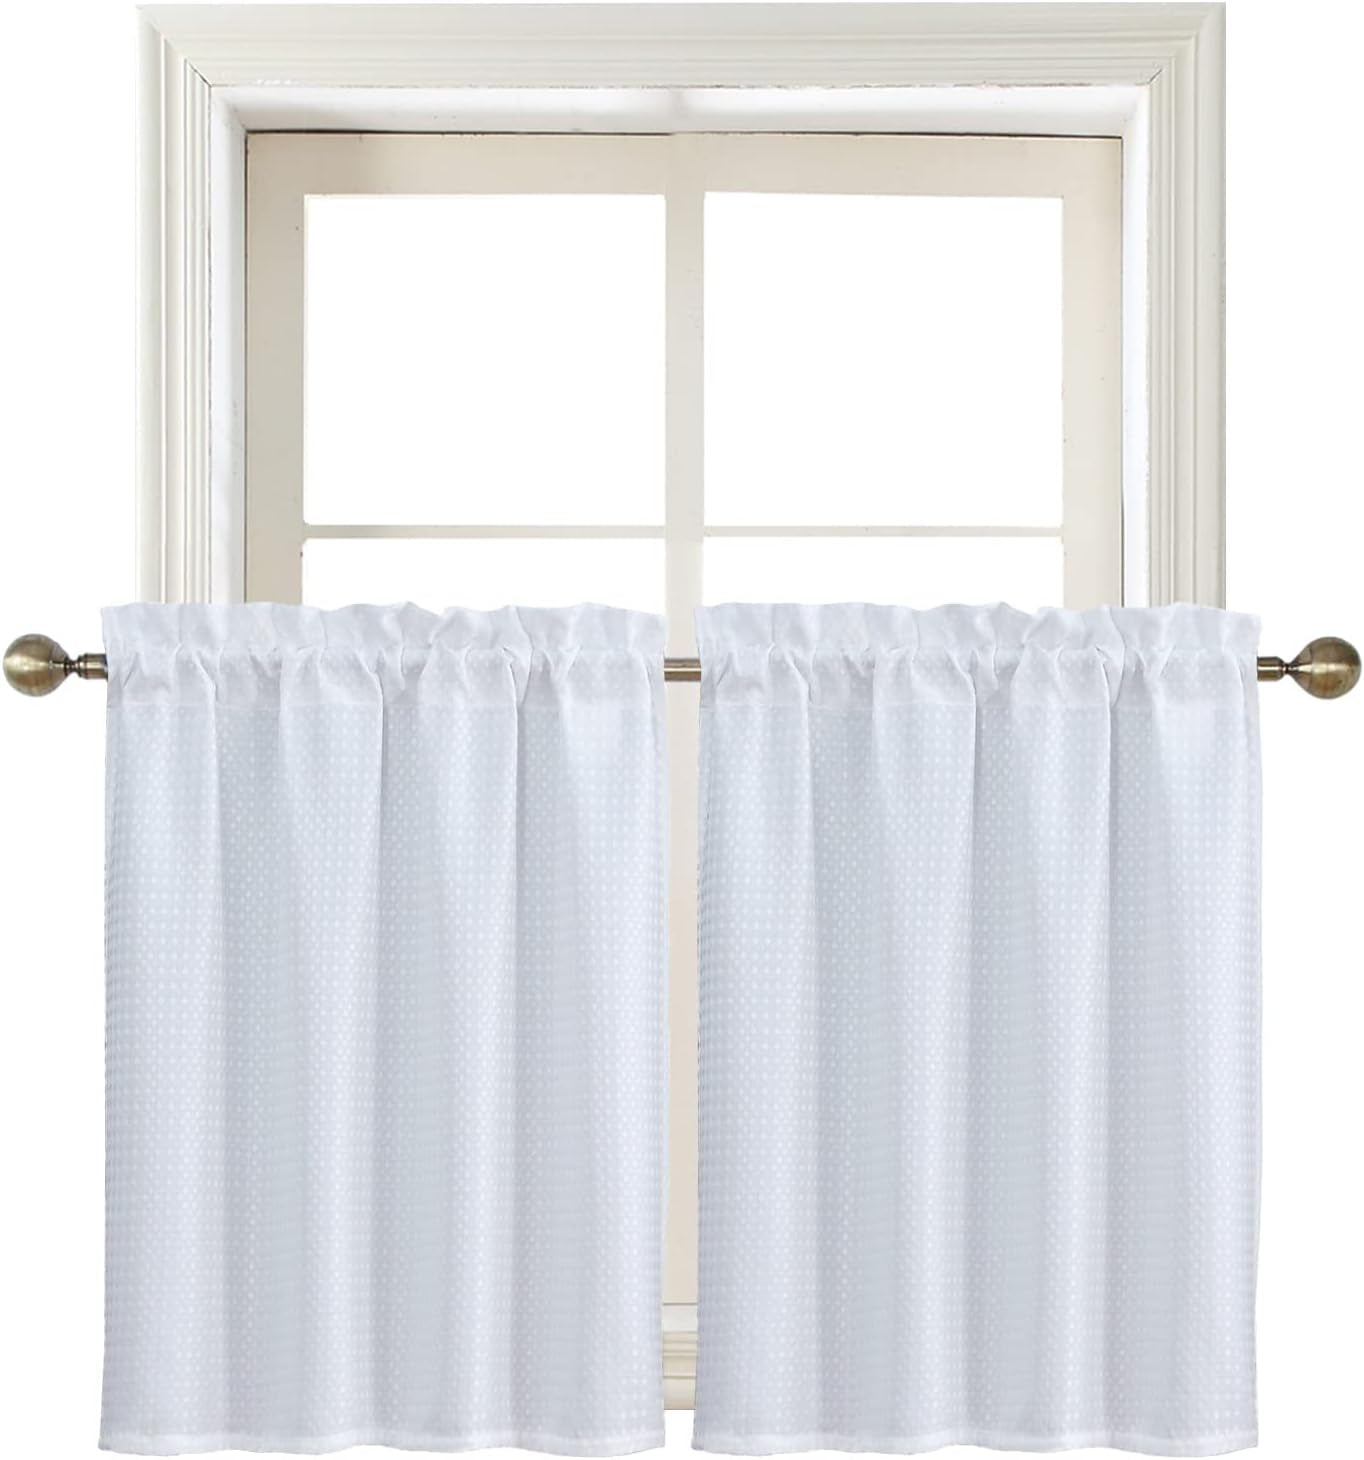 Home Queen White Water Resistant Bathroom Window Curtain, Waffle Textured Half Tier Curtains for Kitchen Cafe, 36" W X 36" L Inches, Set of 2